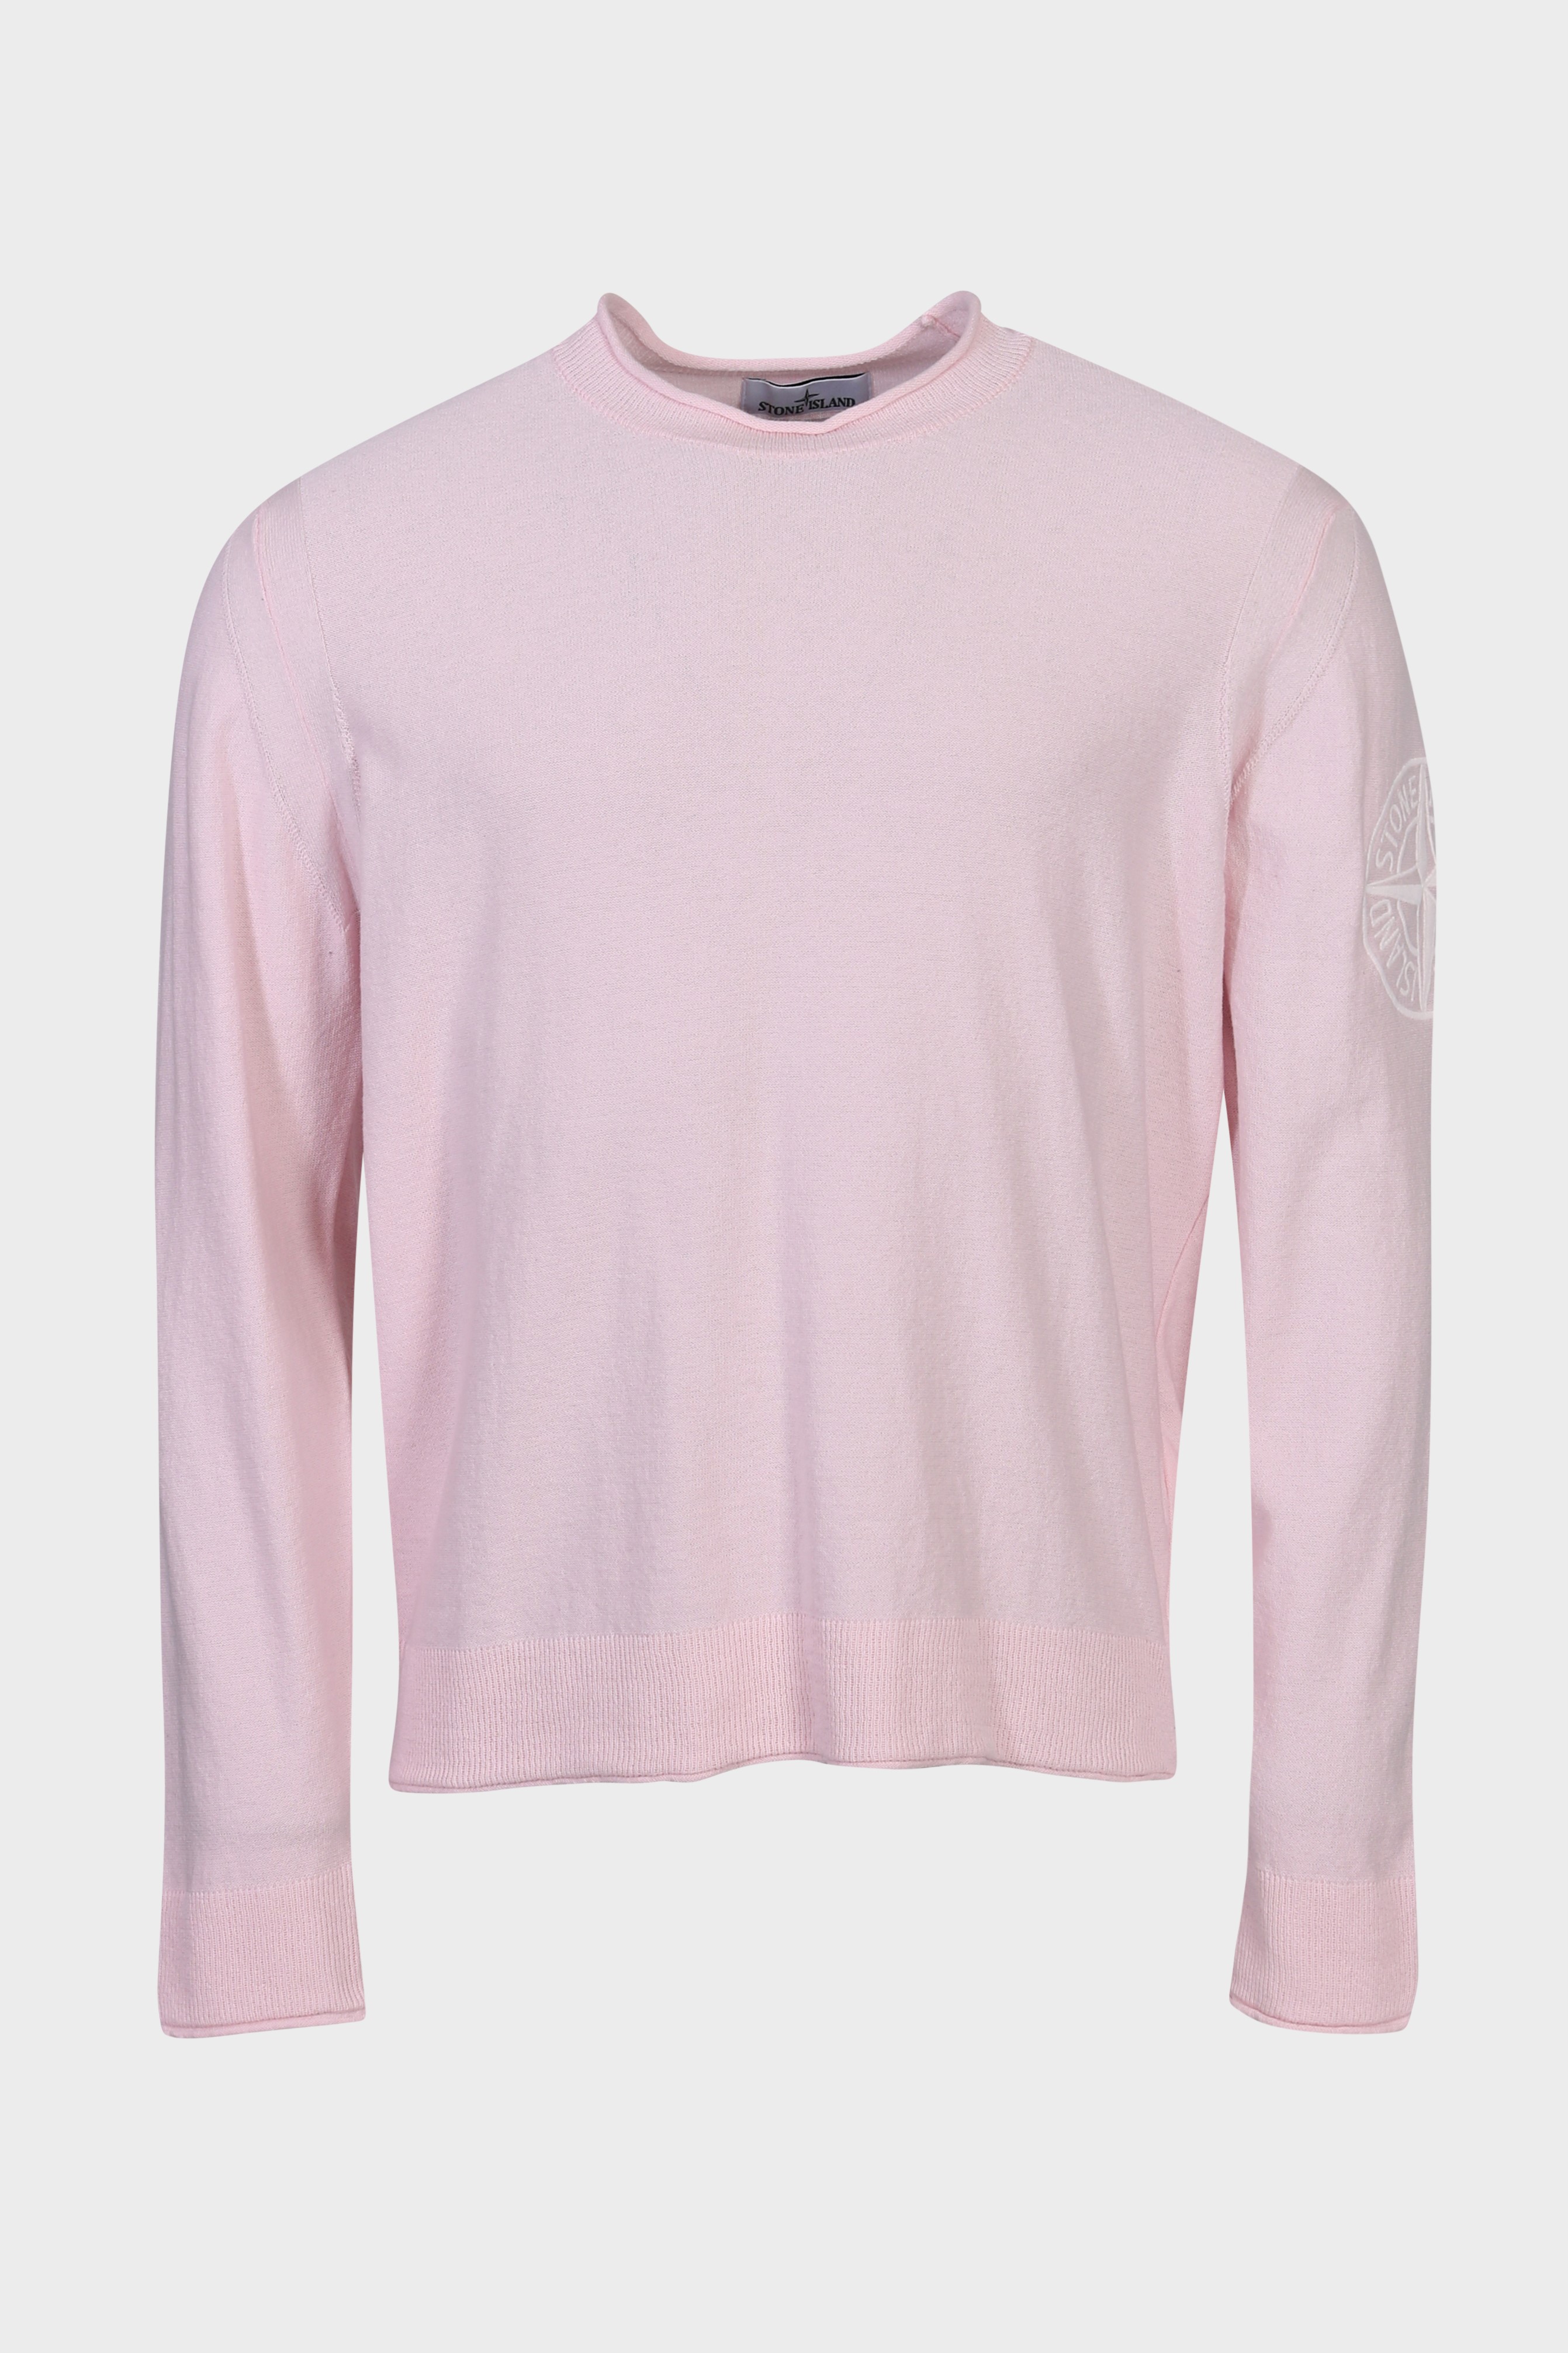 STONE ISLAND Cotton Knit Pullover in Light Pink L